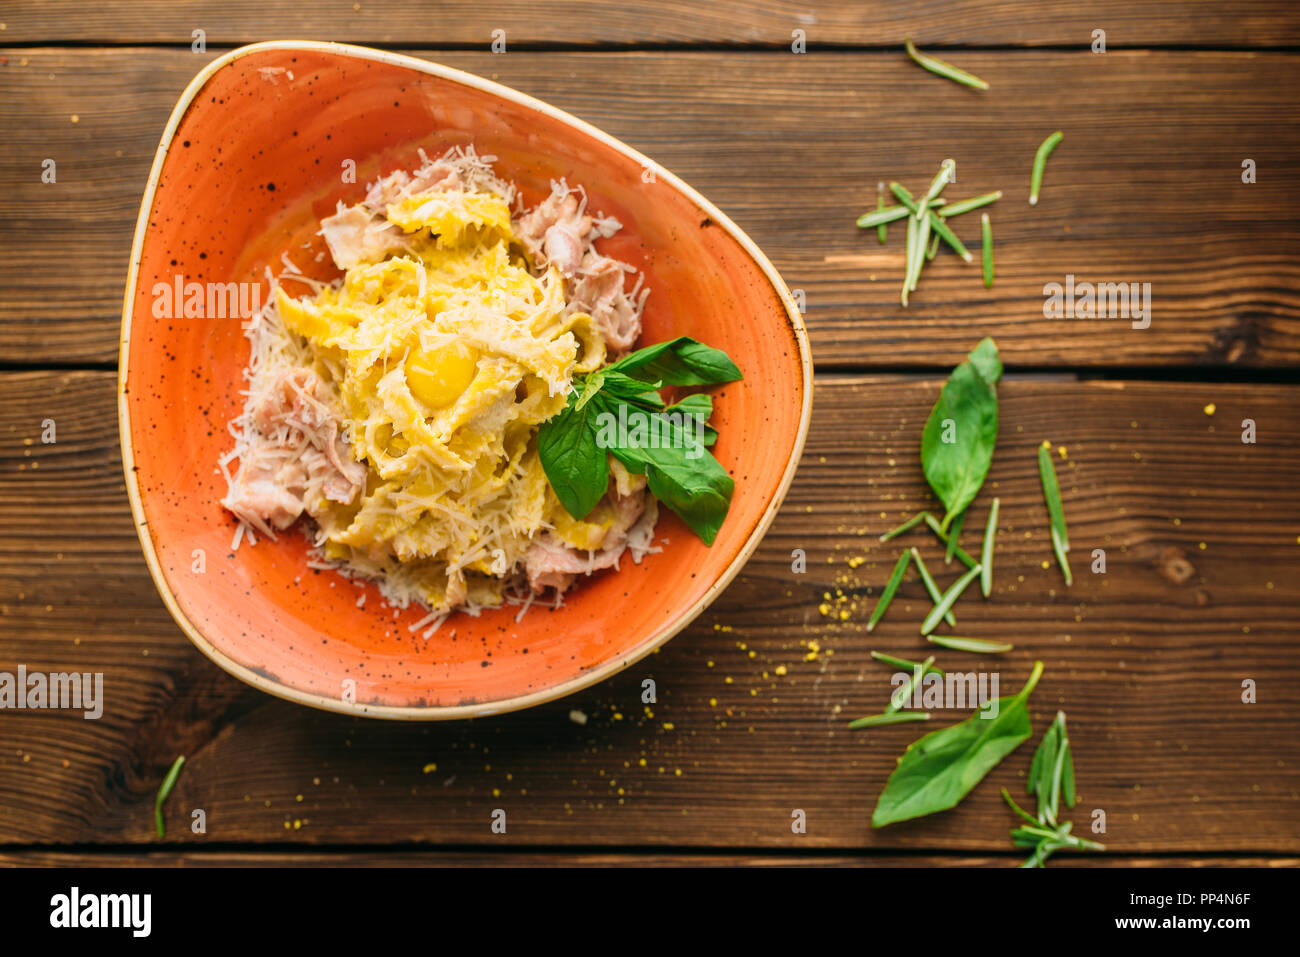 Pasta and meat in a bowl on wooden table closeup, nobody. Second dish, food preparation, cooking Stock Photo